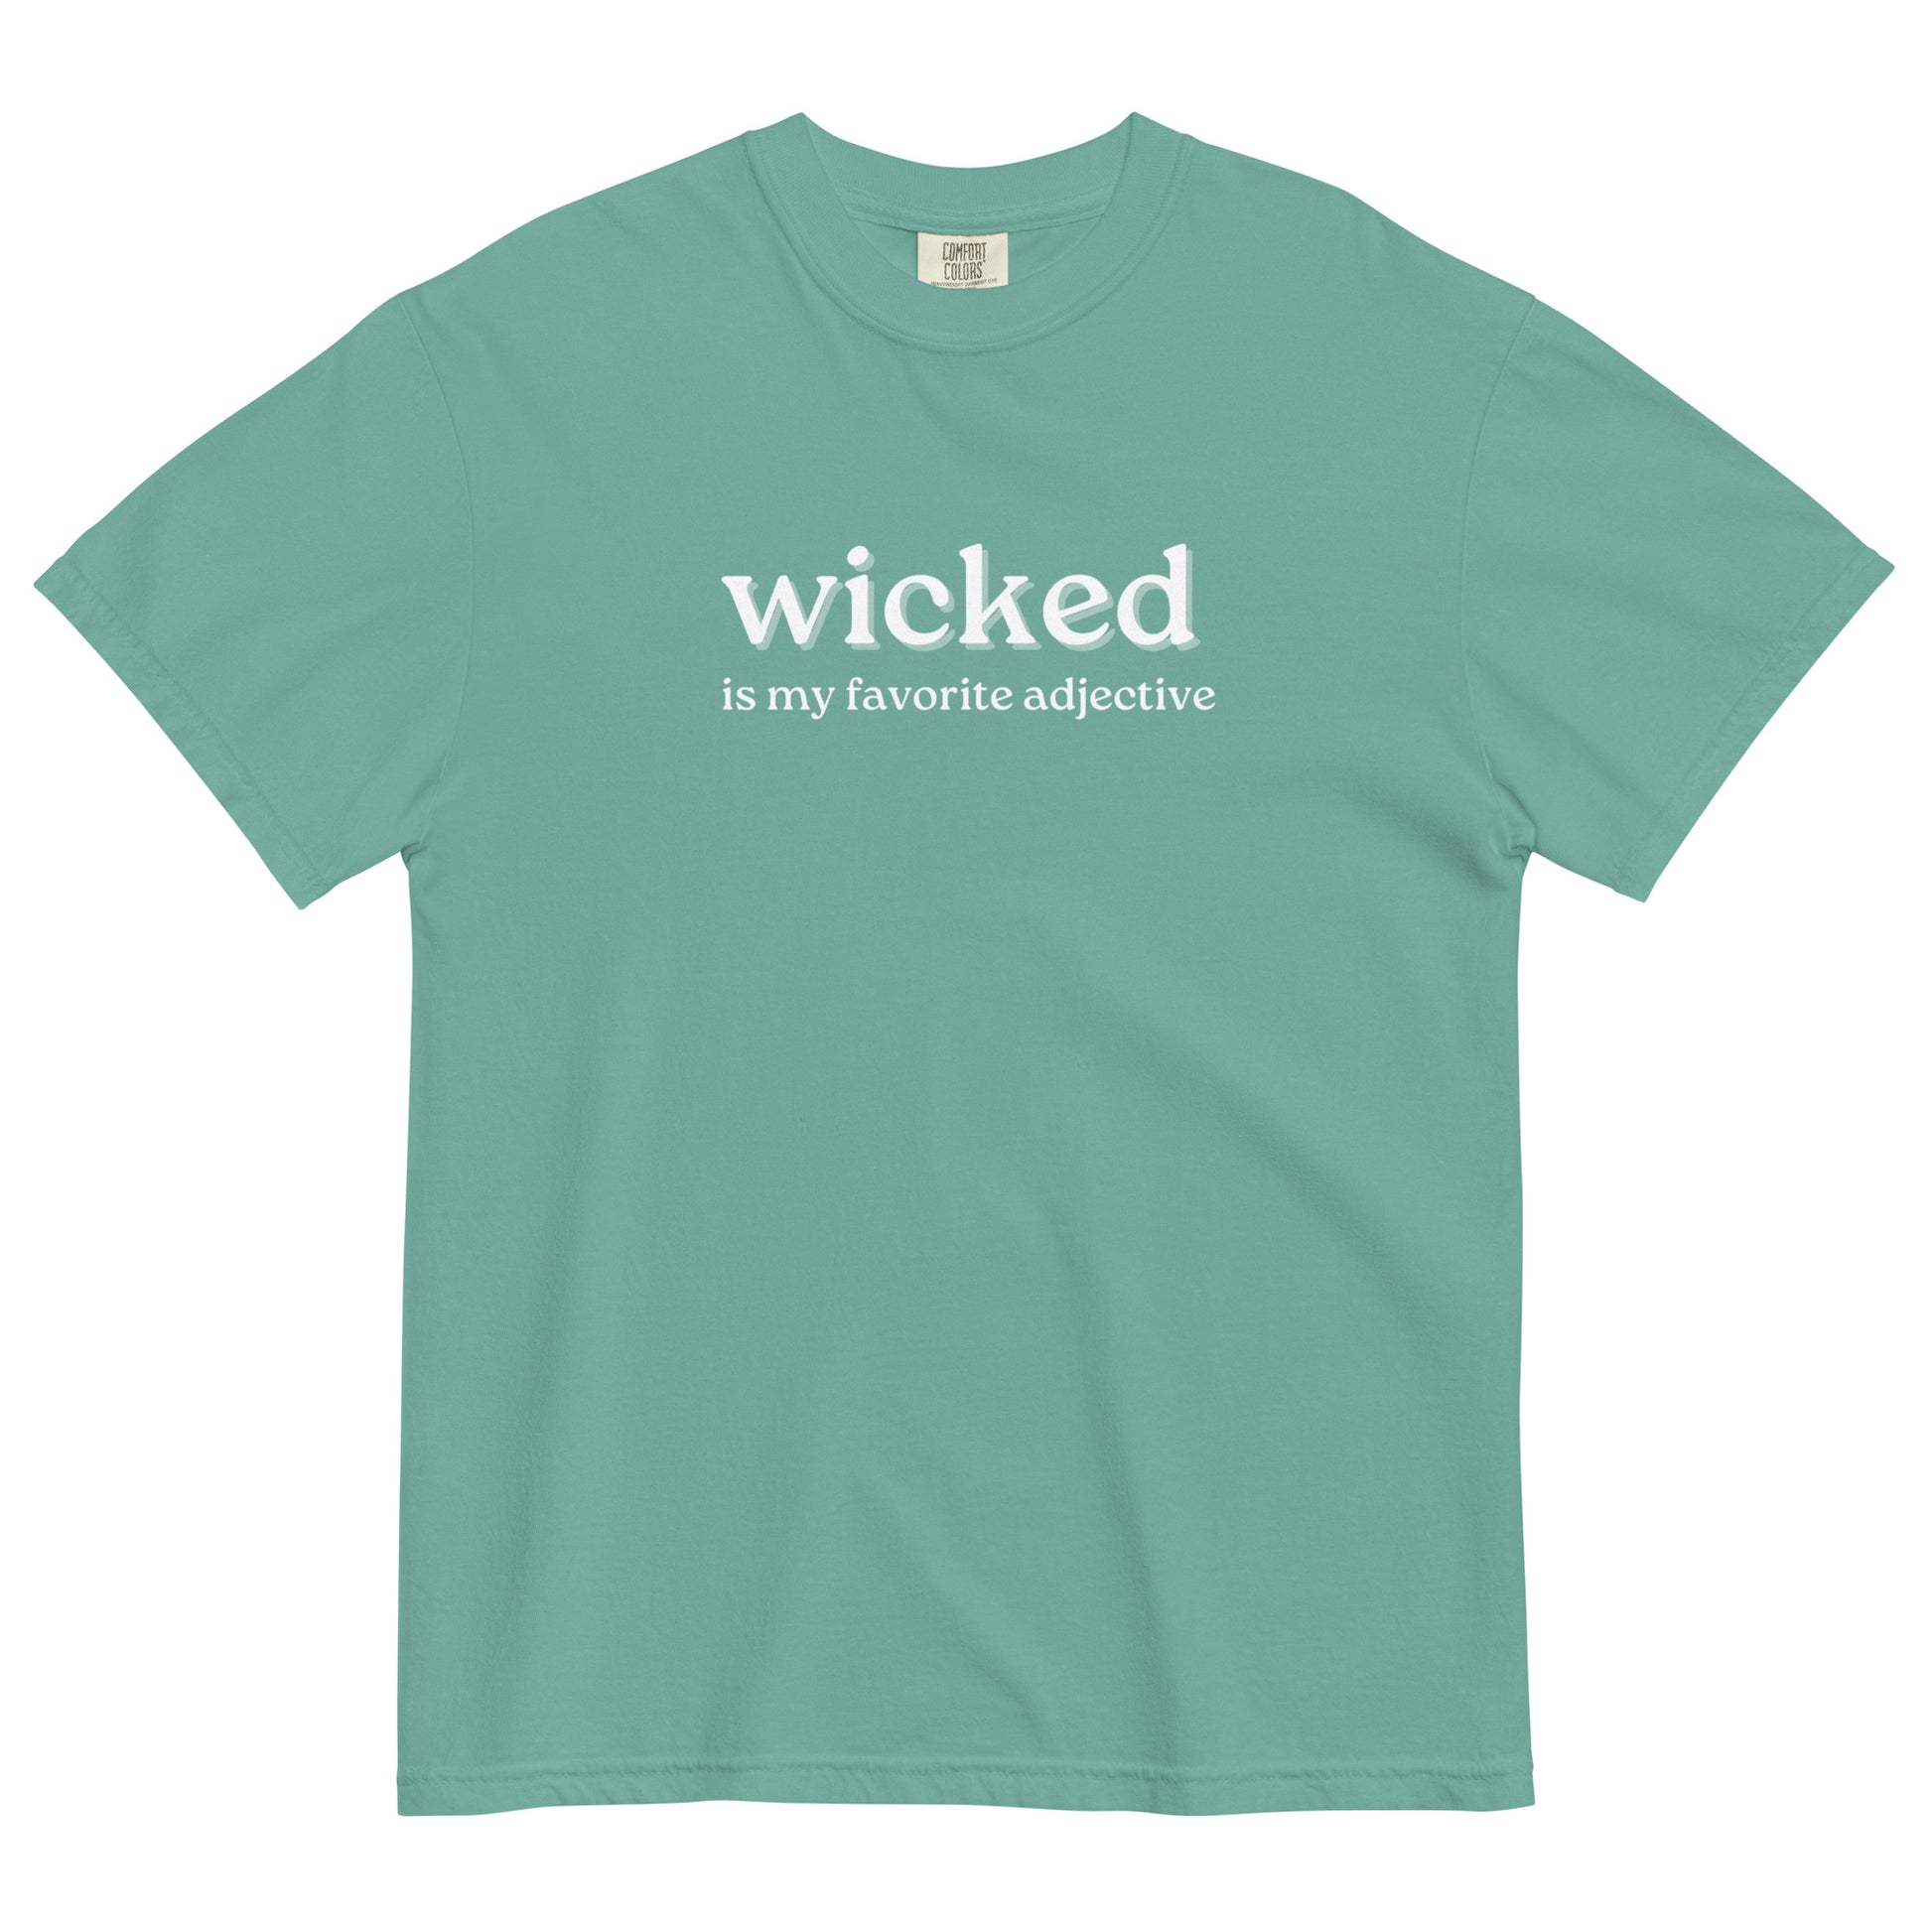 seafoam green tshirt that says "wicked is my favorite adjective" in white lettering